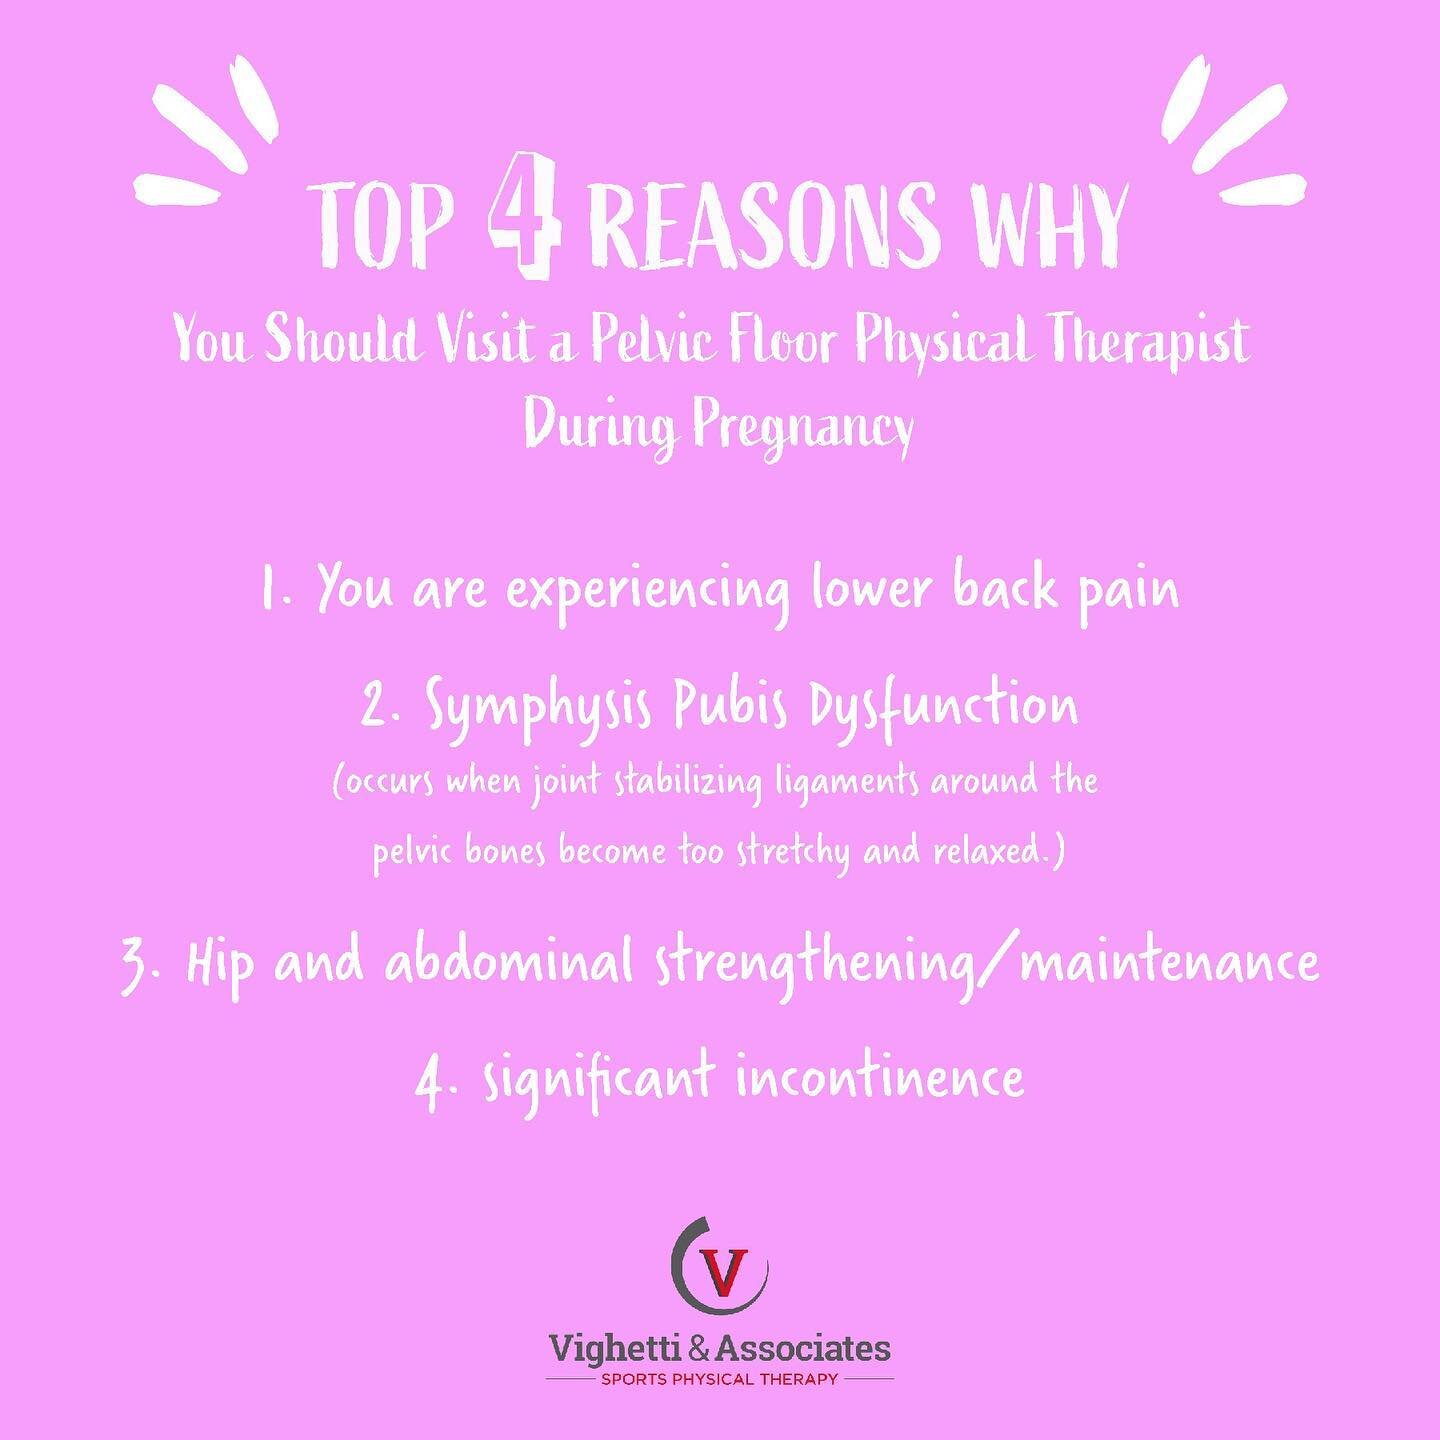 If you are experiencing any of these symptoms or are looking to strengthen your hips and abdominal muscles during pregnancy,🤰we are here to help! Visit our website 💻 for more information! (Link in bio) 👆
.
.
.
.
.
.

#vighettipt #vighettiandassoci